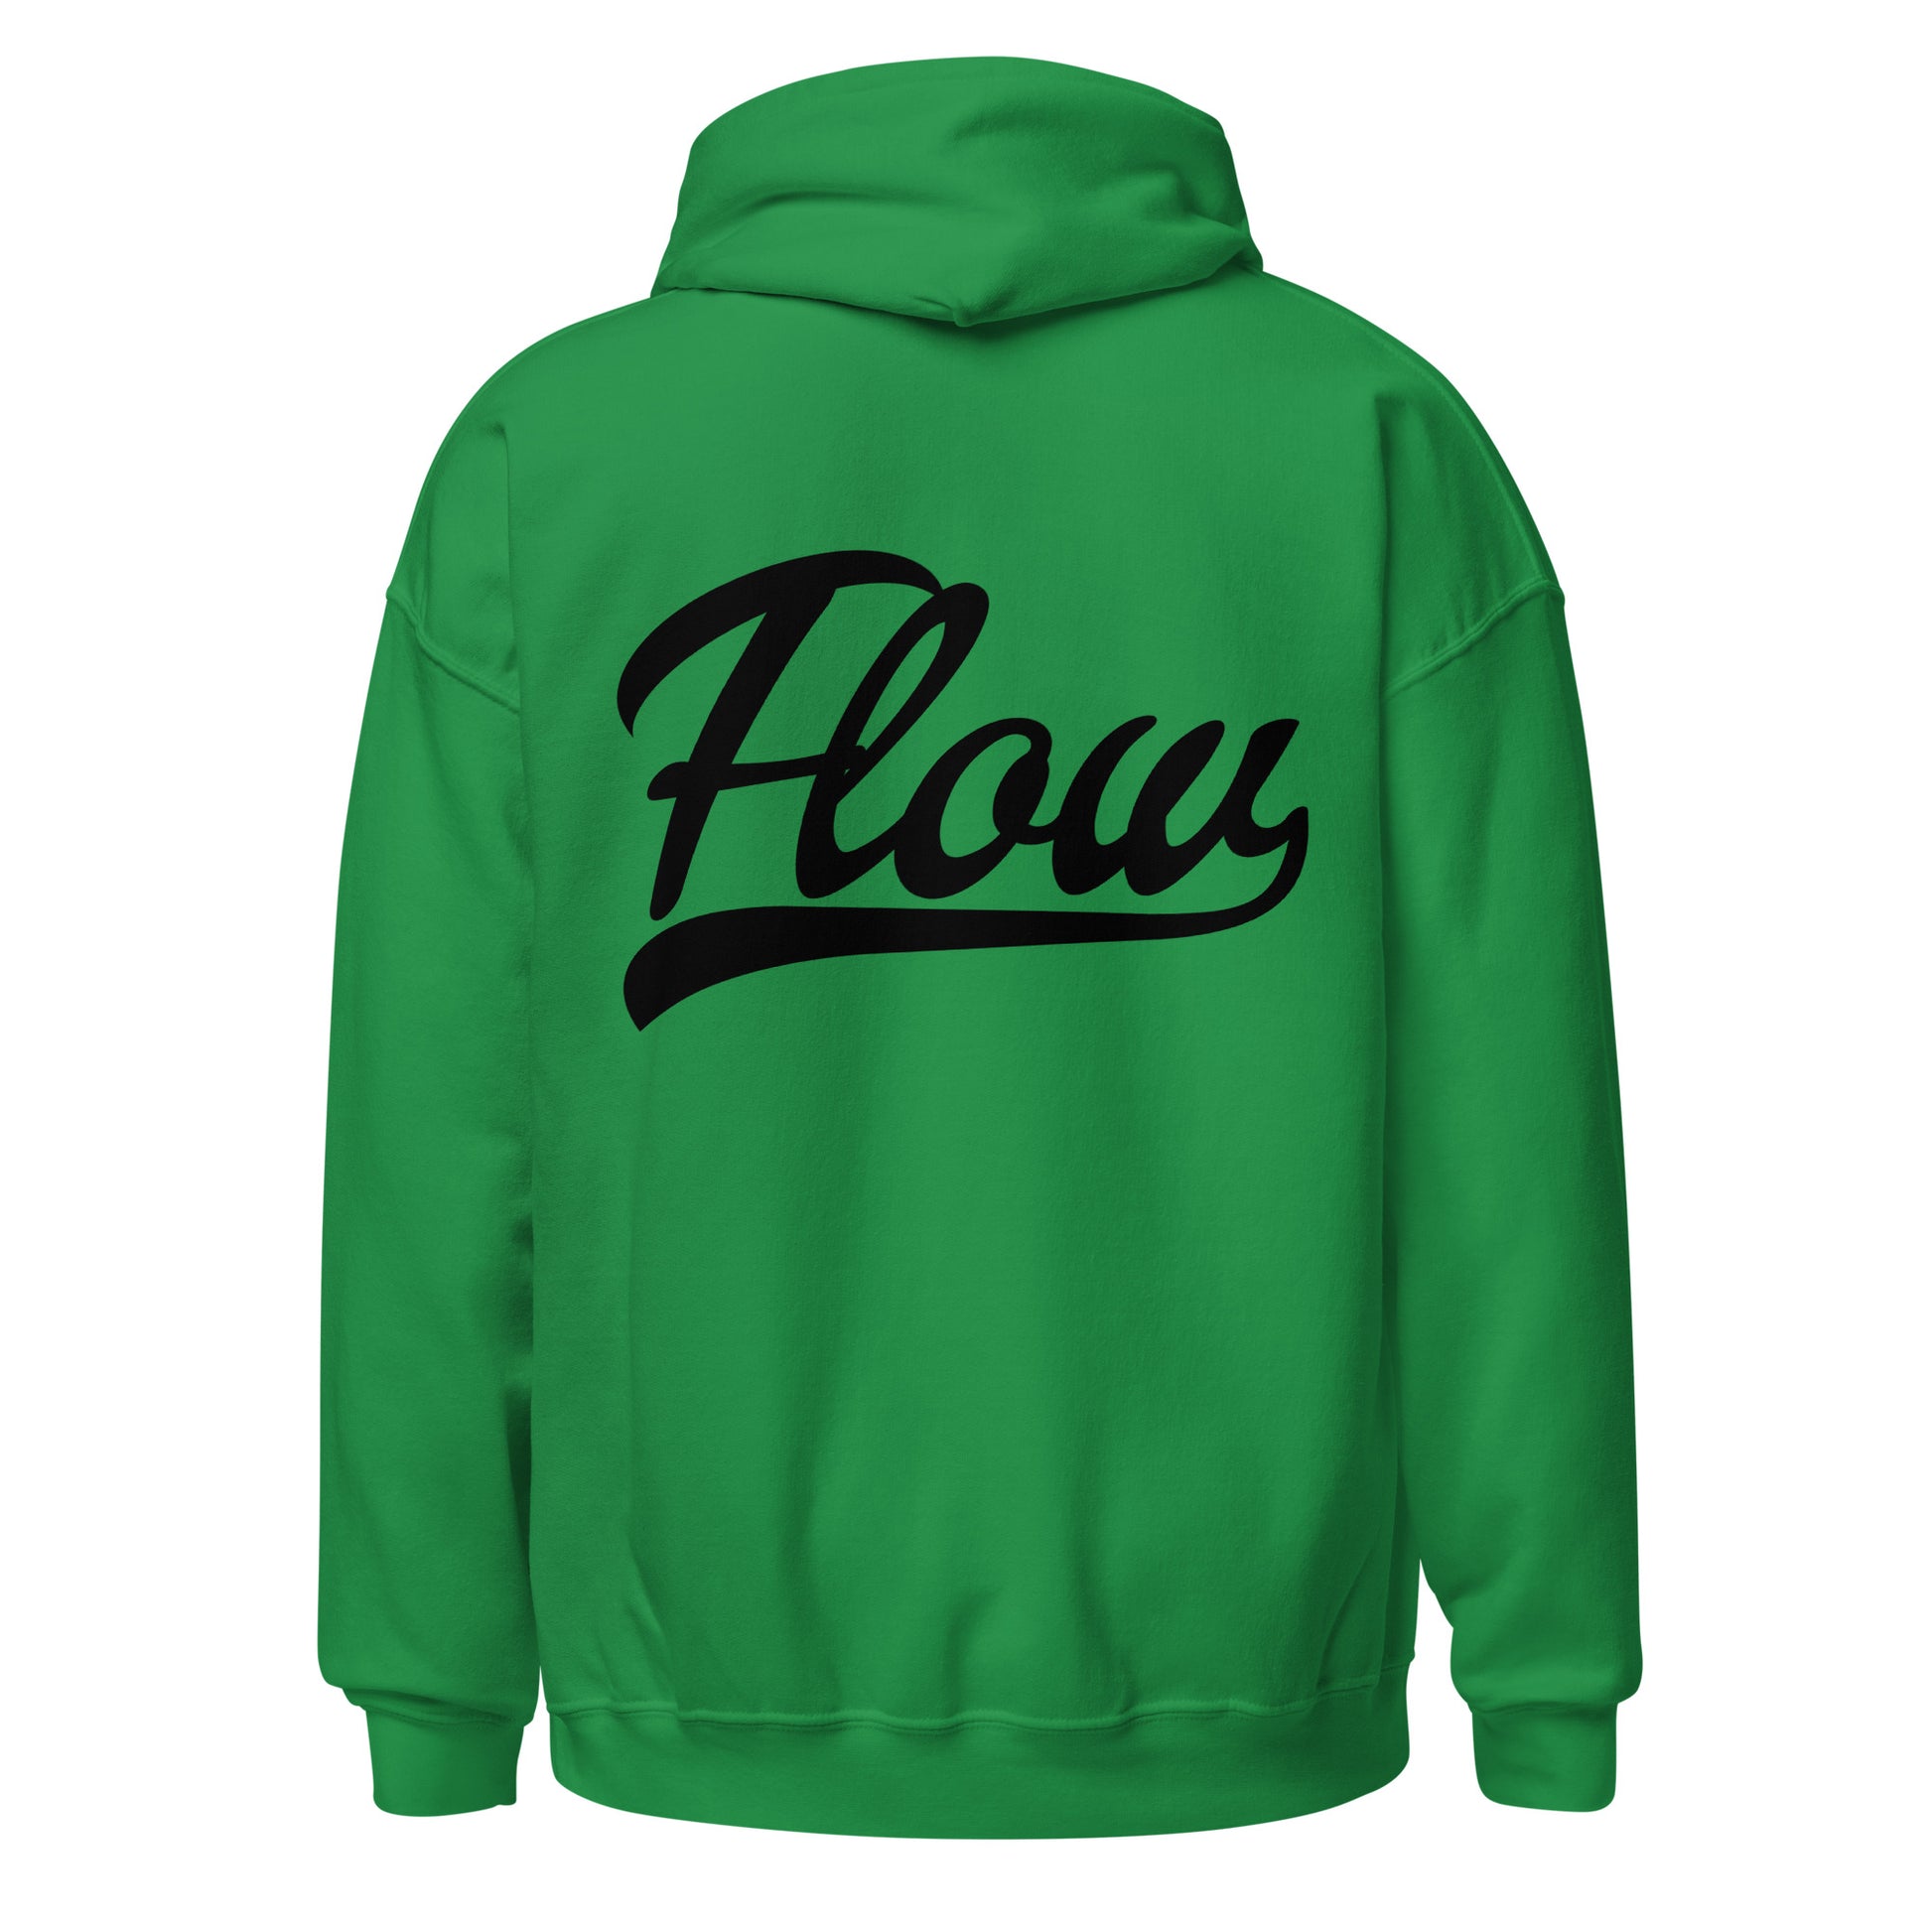 Irish green hoodie with the word 'Flow' on the back and our logo mark on front left chest.